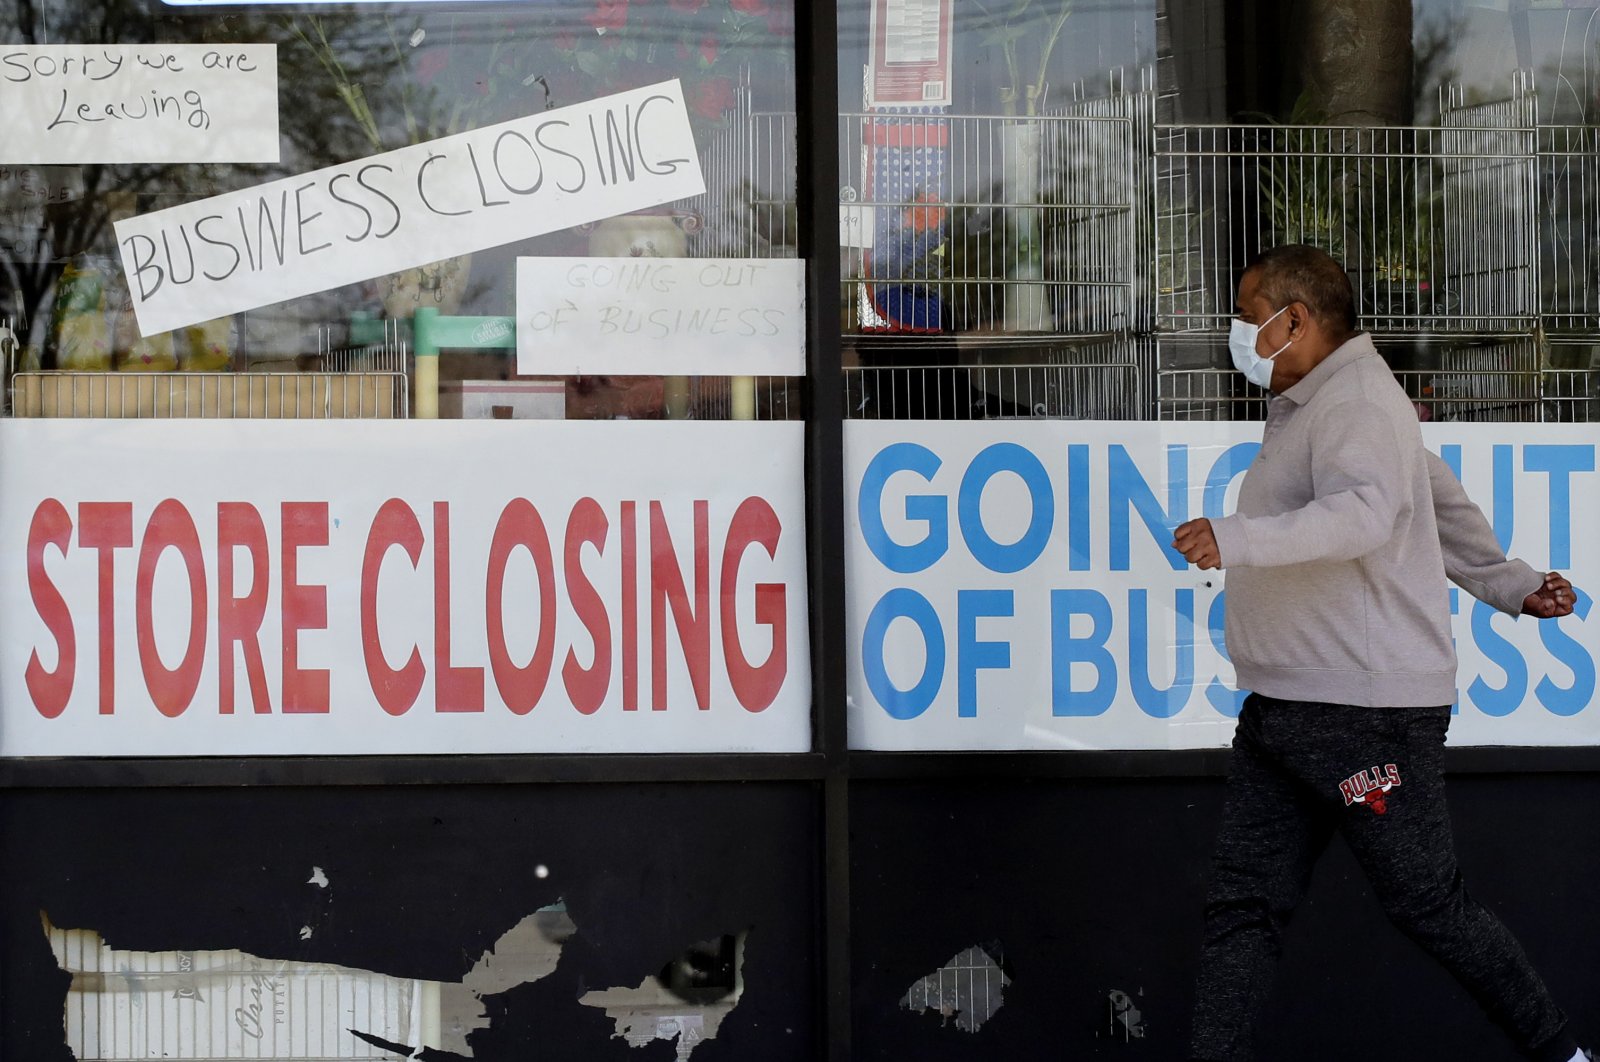 A man walks past signs of a store going out of business during the coronavirus outbreak in Niles, Illinois, U.S., May 21, 2020. (AP Photo)